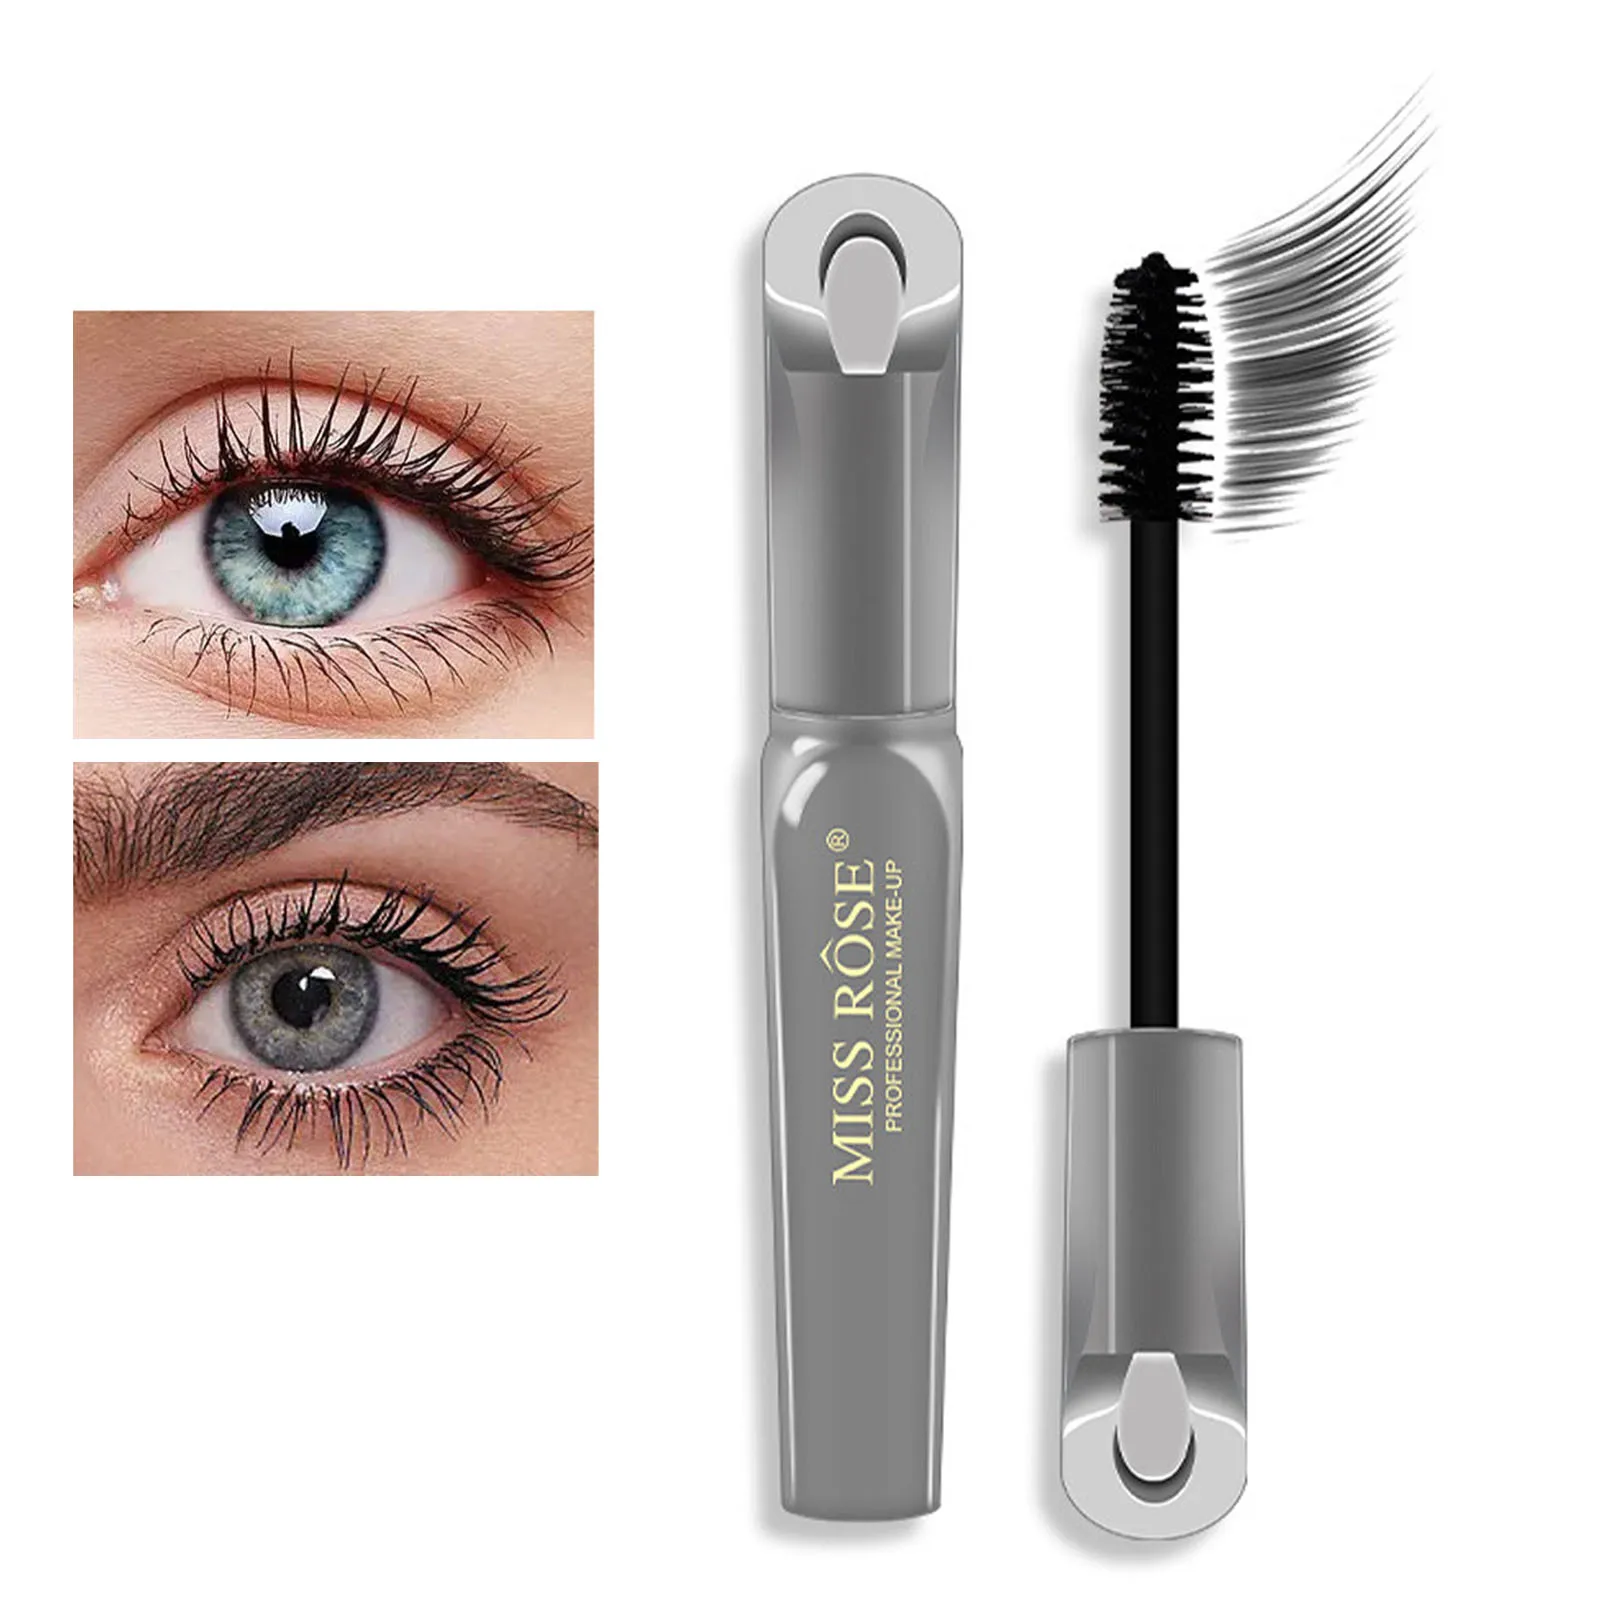 

4D Silk Fiber Lashes Mascara Waterproof Mascara Black Volume And Length Thickening Curling Lash Makeup For Women And Girls